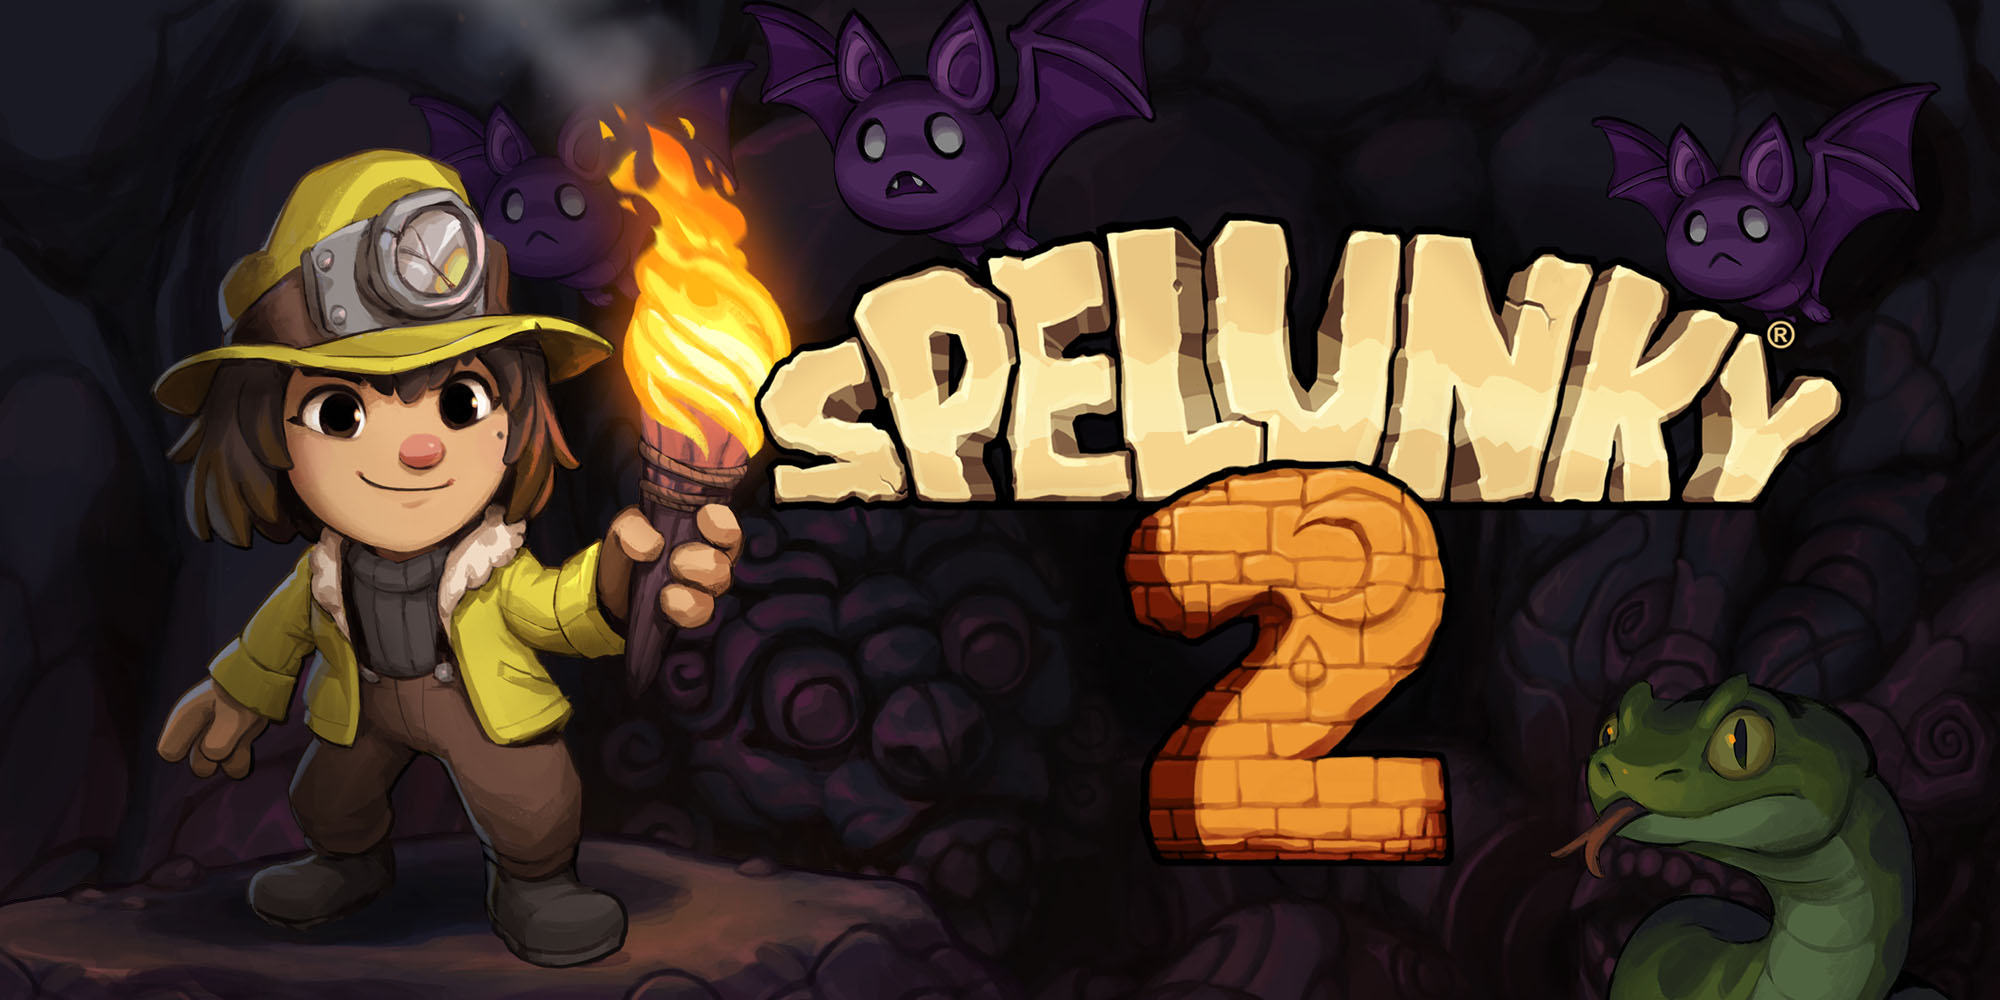 An update 1.26 has been released for Spelunky 2, which brings crosplay to the game